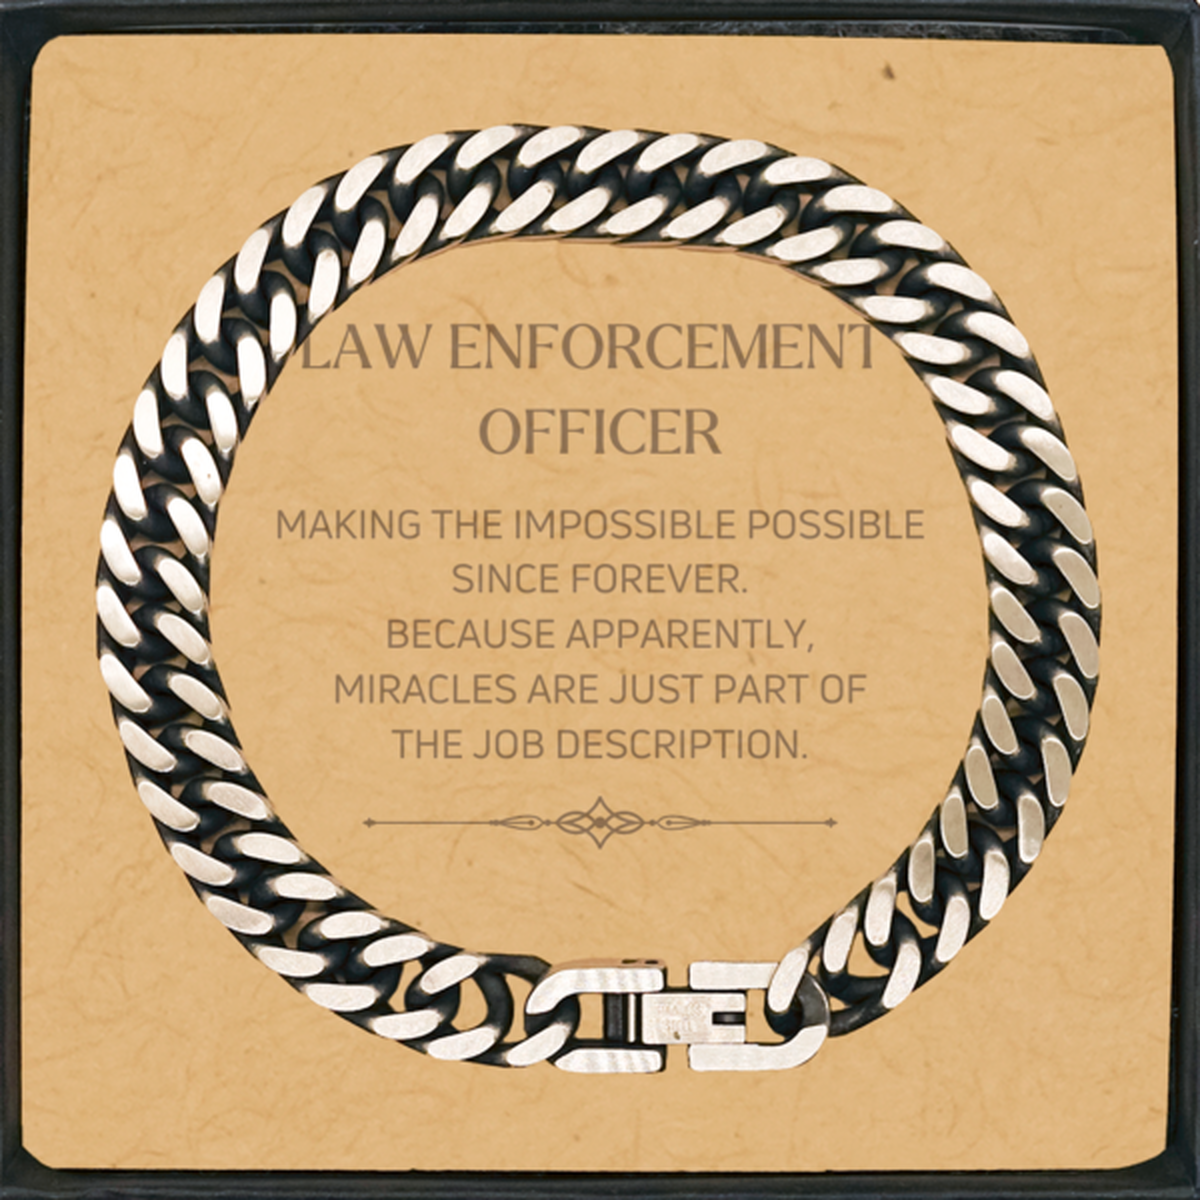 Funny Law Enforcement Officer Gifts, Miracles are just part of the job description, Inspirational Birthday Cuban Link Chain Bracelet For Law Enforcement Officer, Men, Women, Coworkers, Friends, Boss